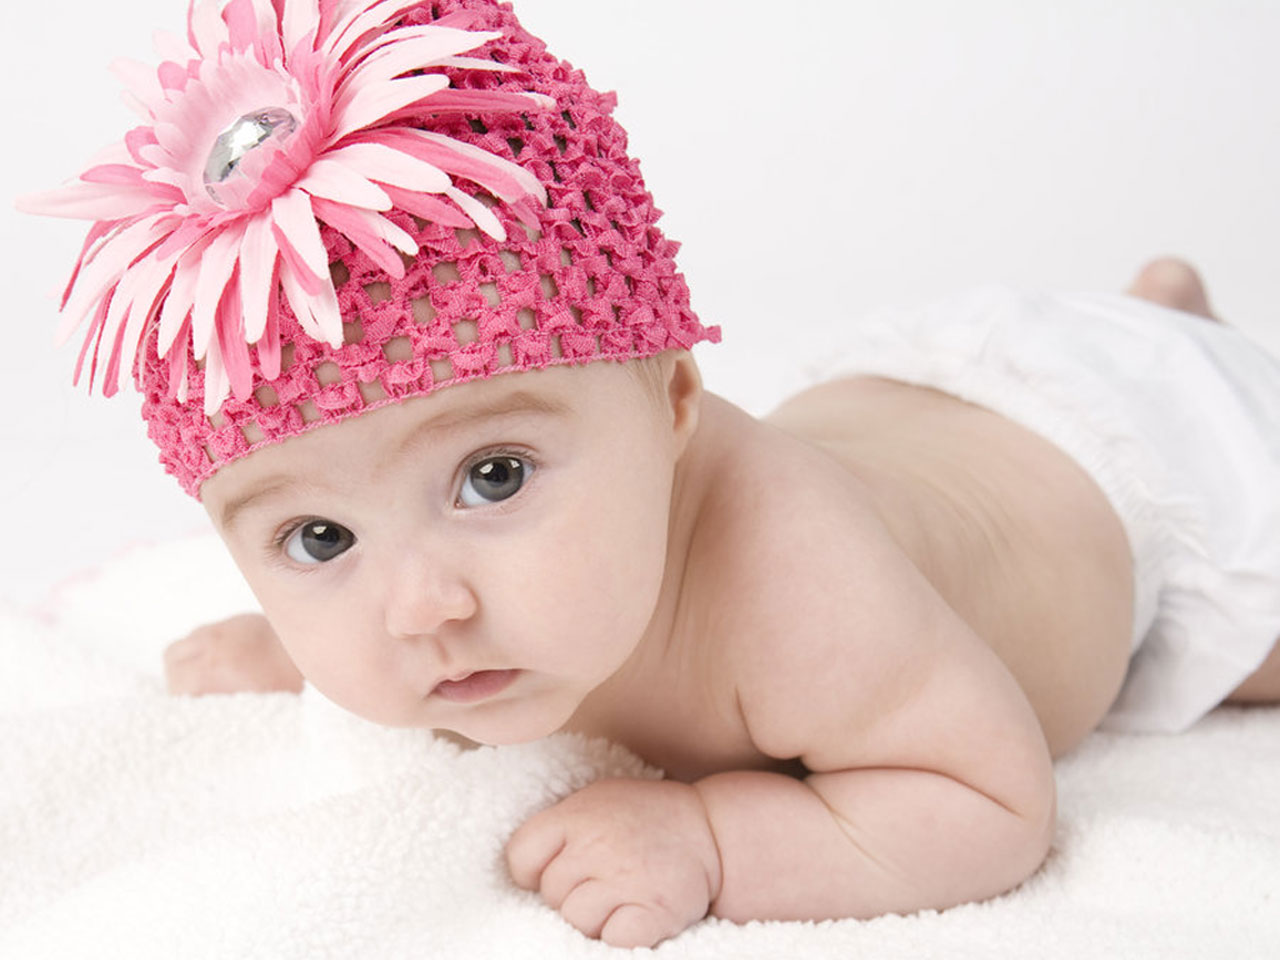 Baby Wallpapers - Baby Good Morning Pic New , HD Wallpaper & Backgrounds